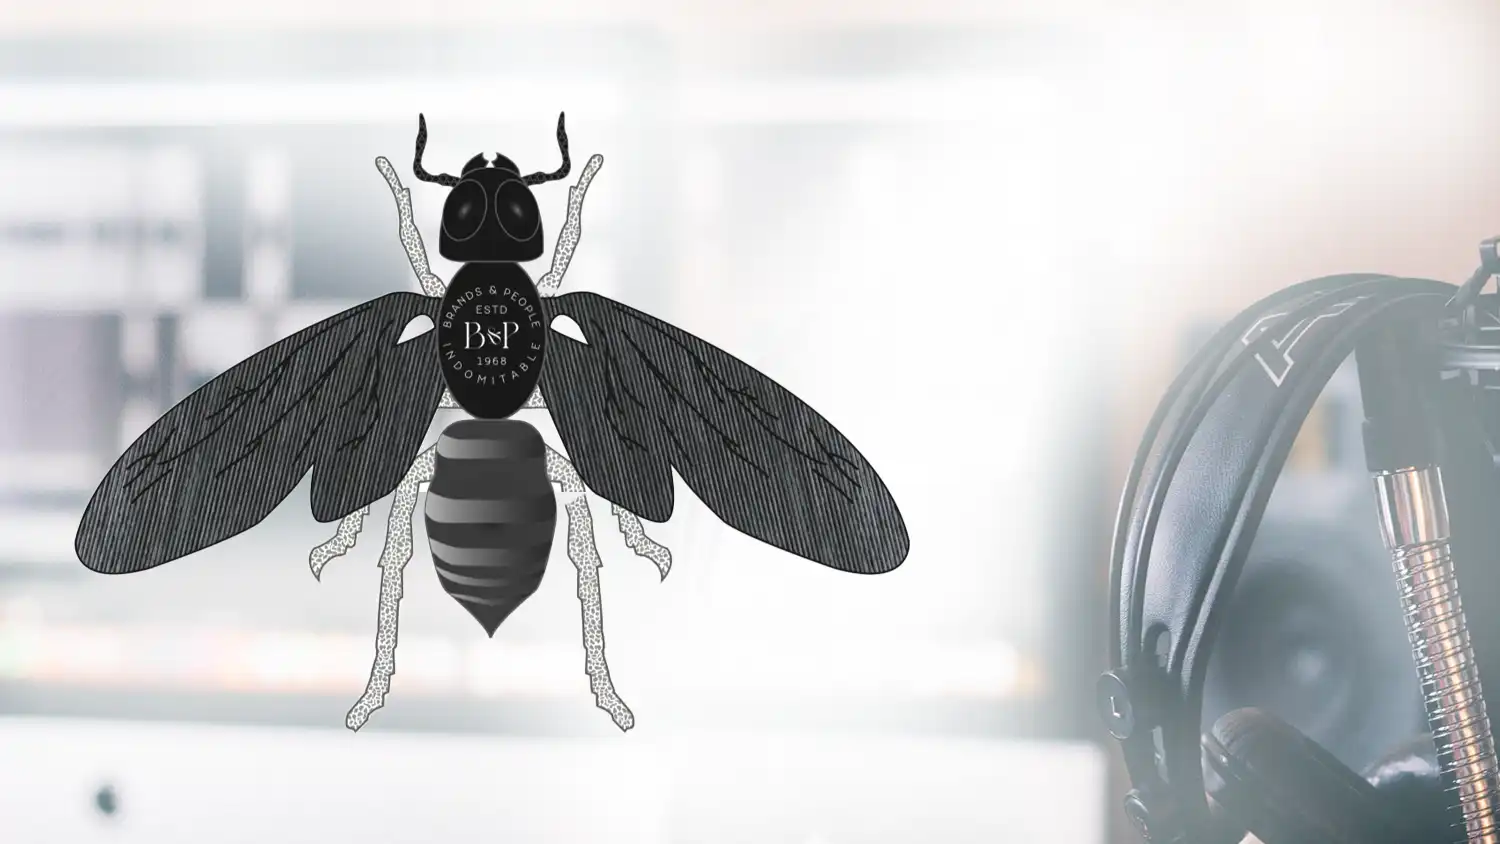 Artist rendering of a bee with B&P logo